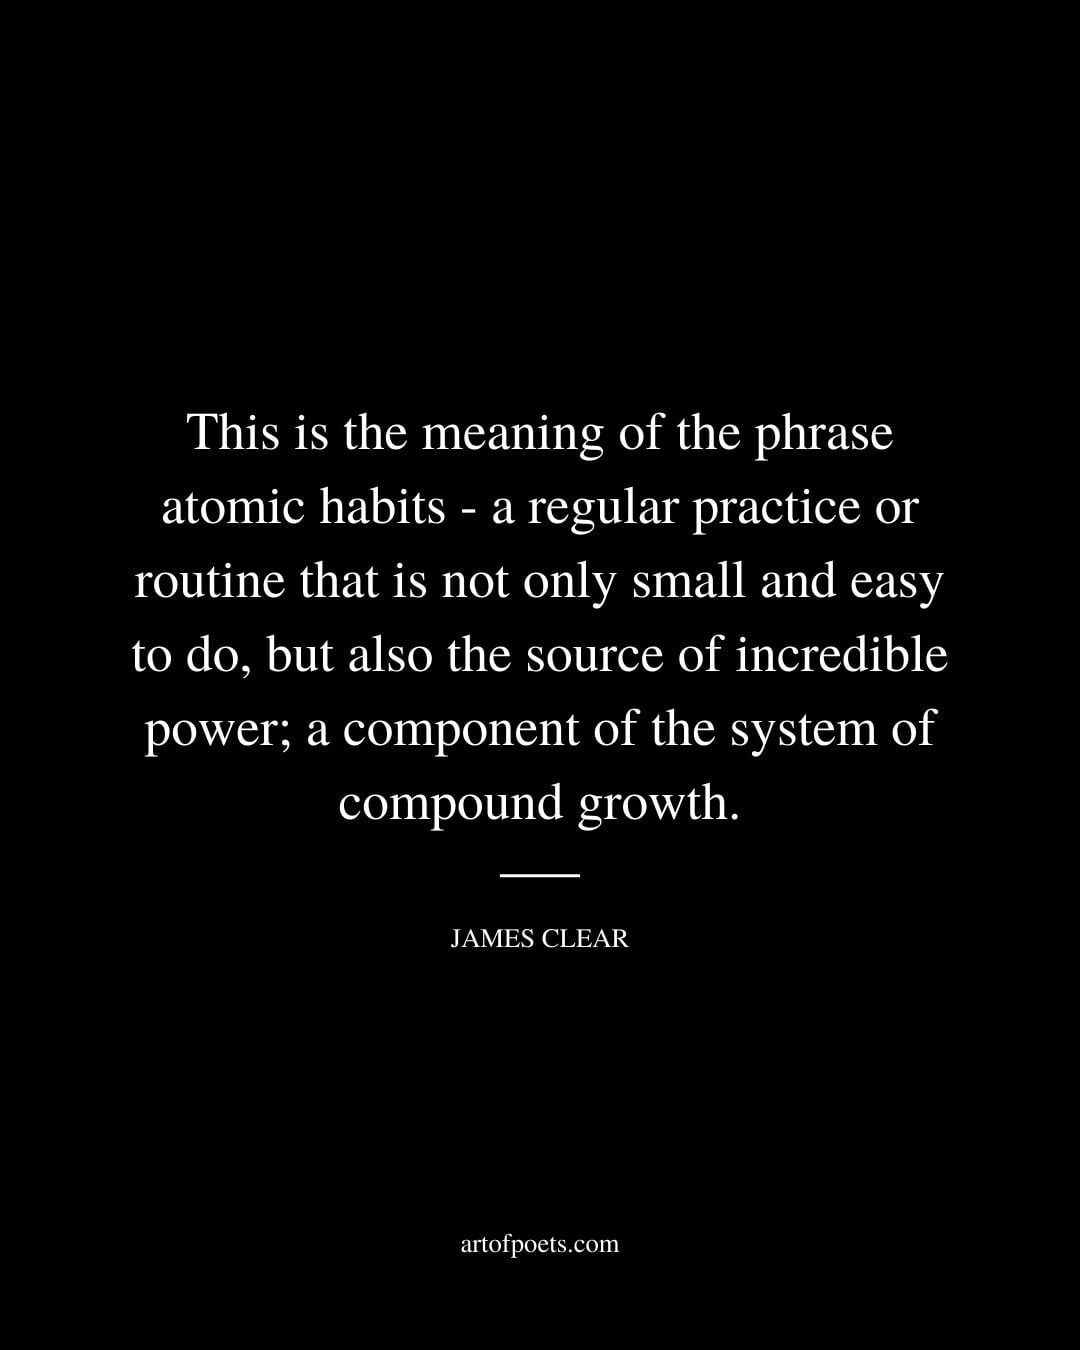 This is the meaning of the phrase atomic habits